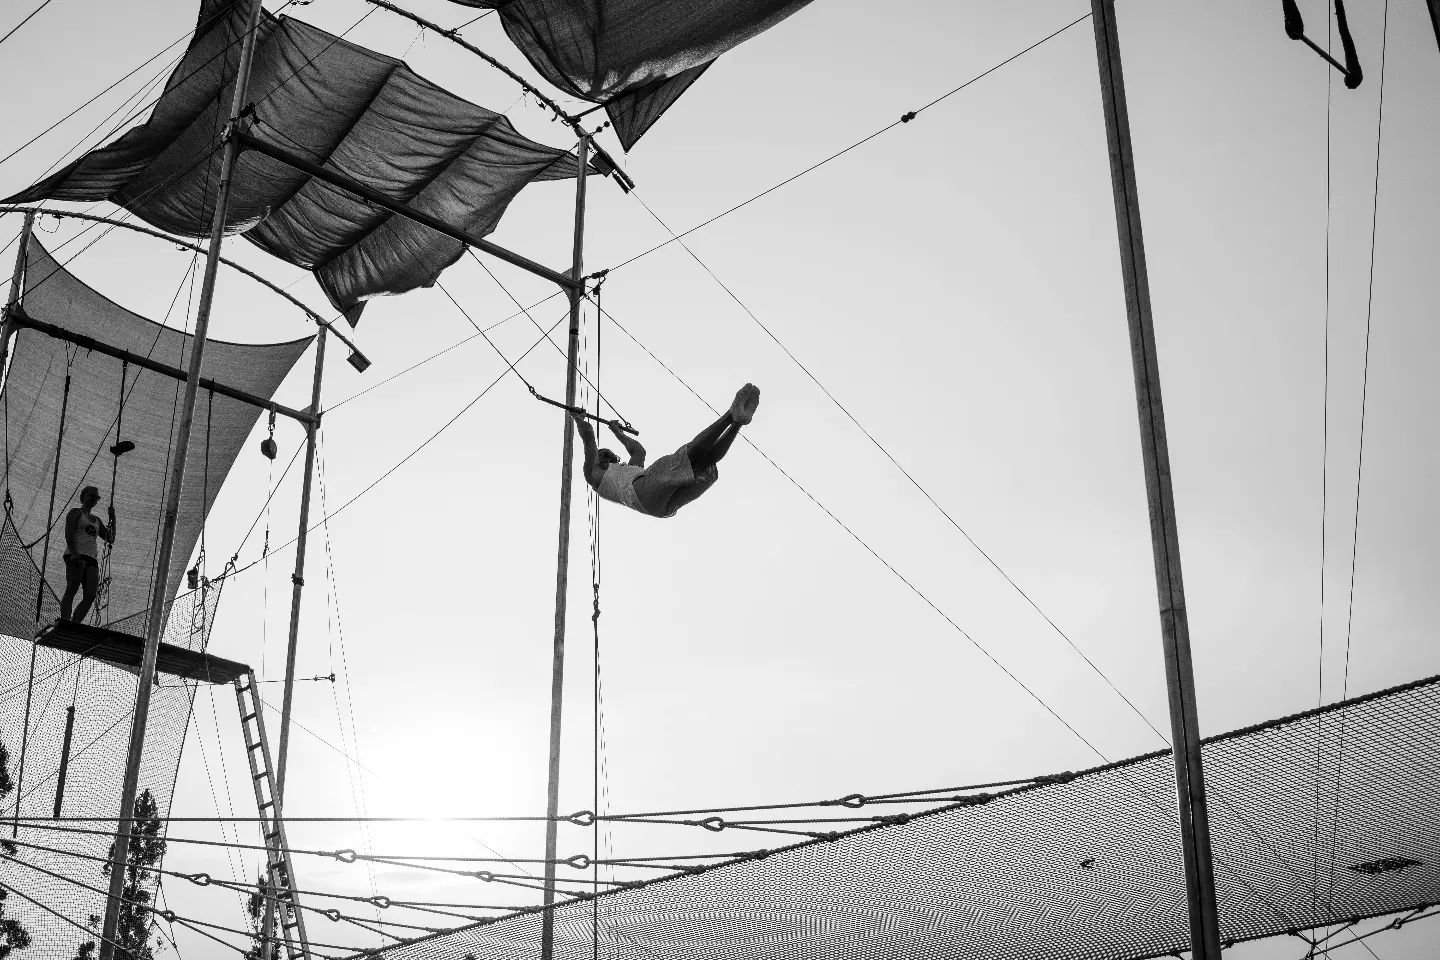 Soaring high with some awesome photos by @jason_nower 

Capture your favorite moment on the trapeze and fly high with us! 

#flyingtrapeze #bridgehampton #circuseverydamnday #summervibes #sagharbor #easthampton #hamptons